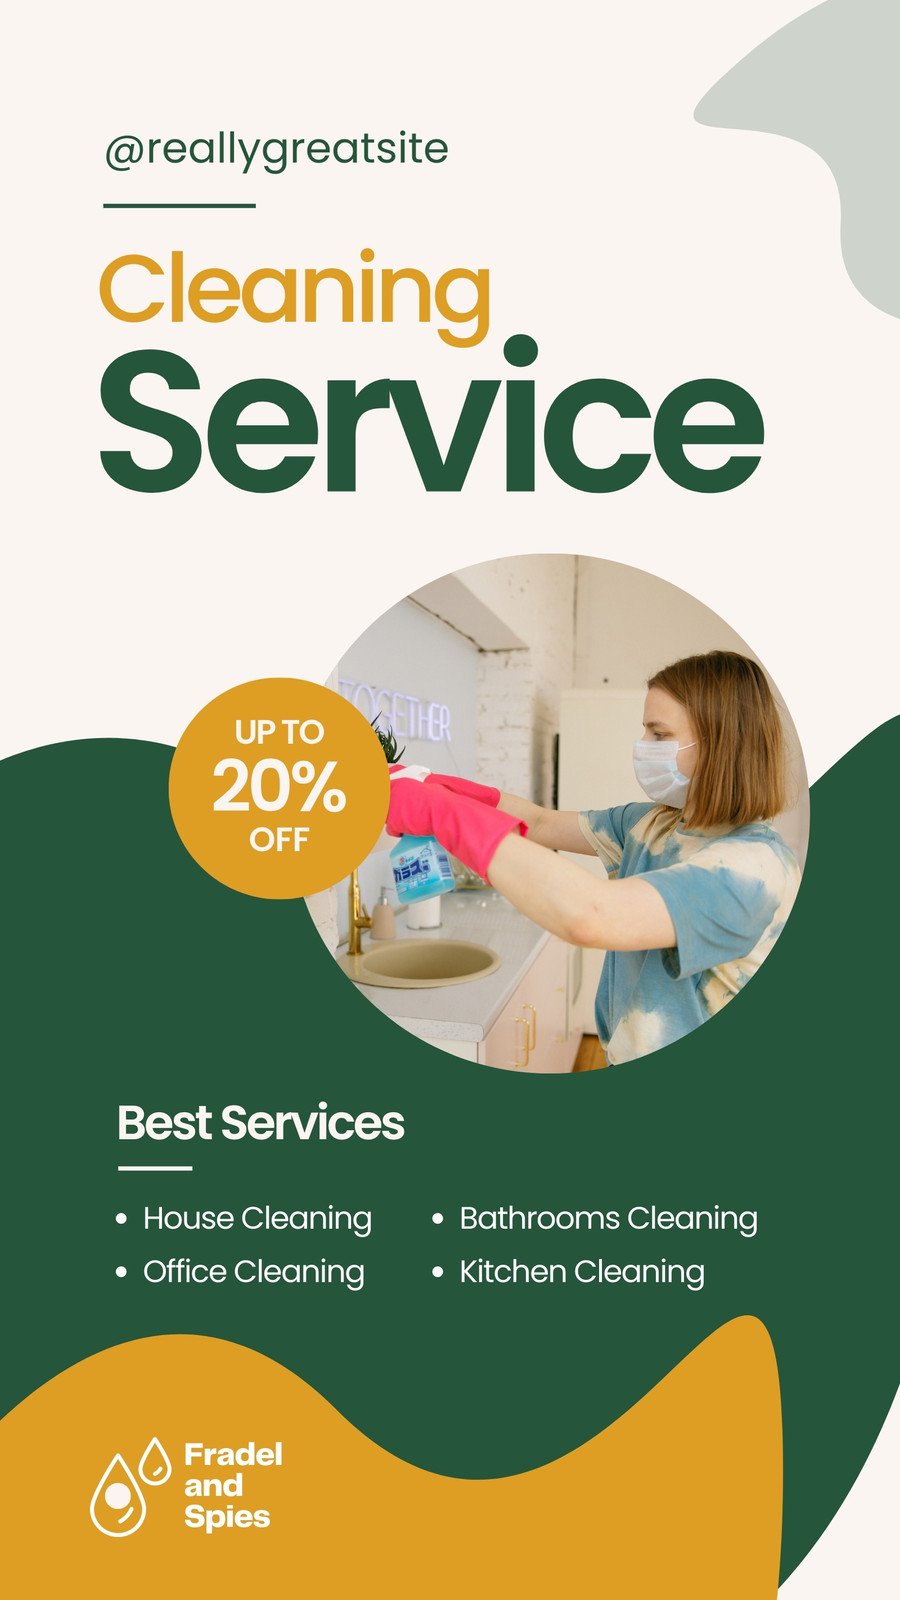 Office Cleaning Services - ECO-CARE CLEANING SERVICES